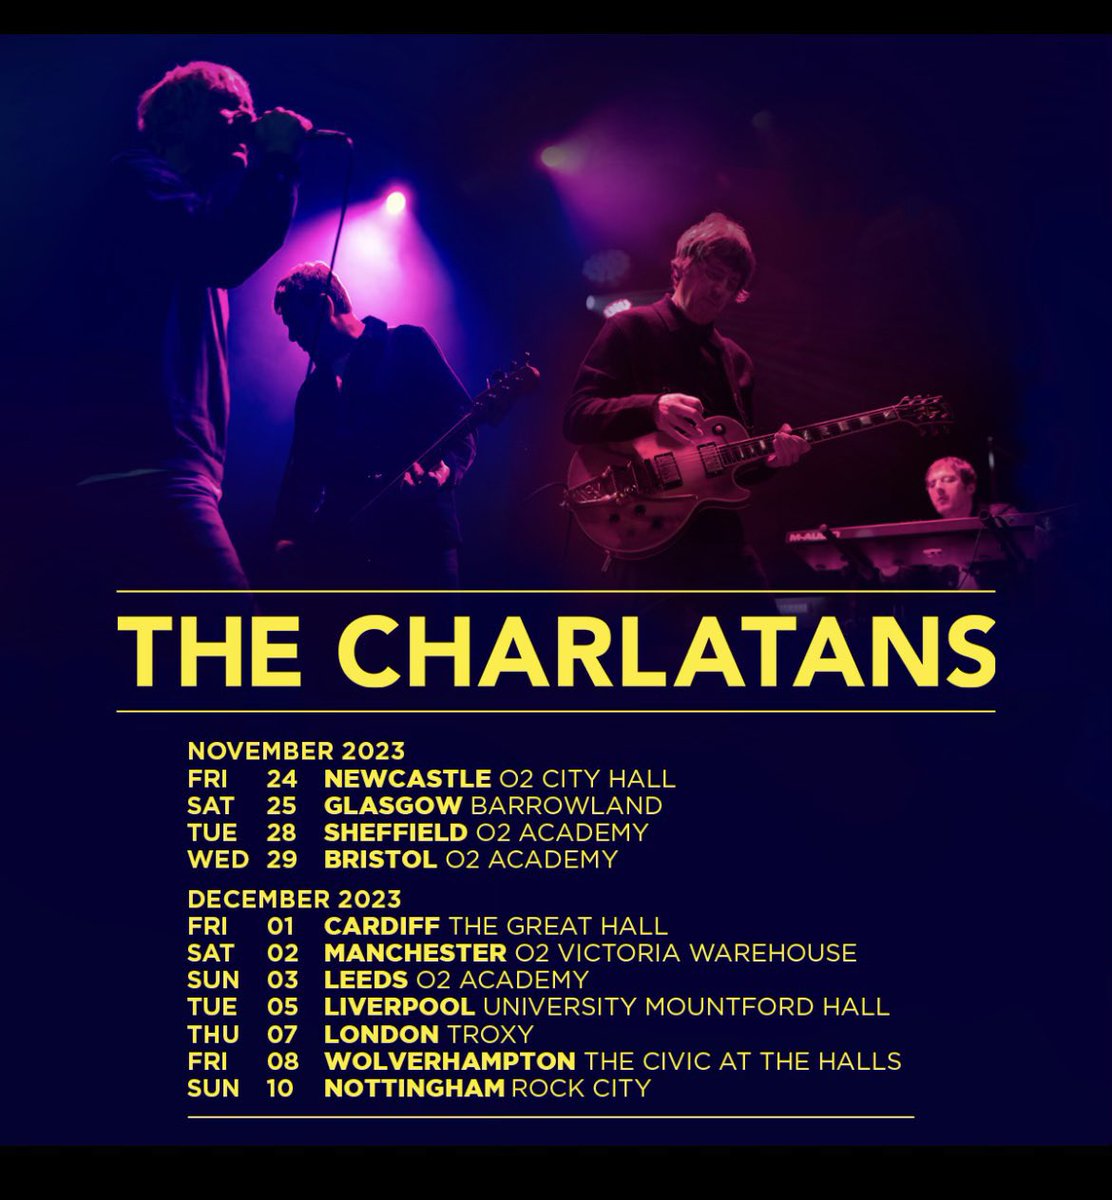 #TimsTicketGiveaway #TheCharlatans Manchester would be awesome please! 🙏🏻🎶💛🤞🏻